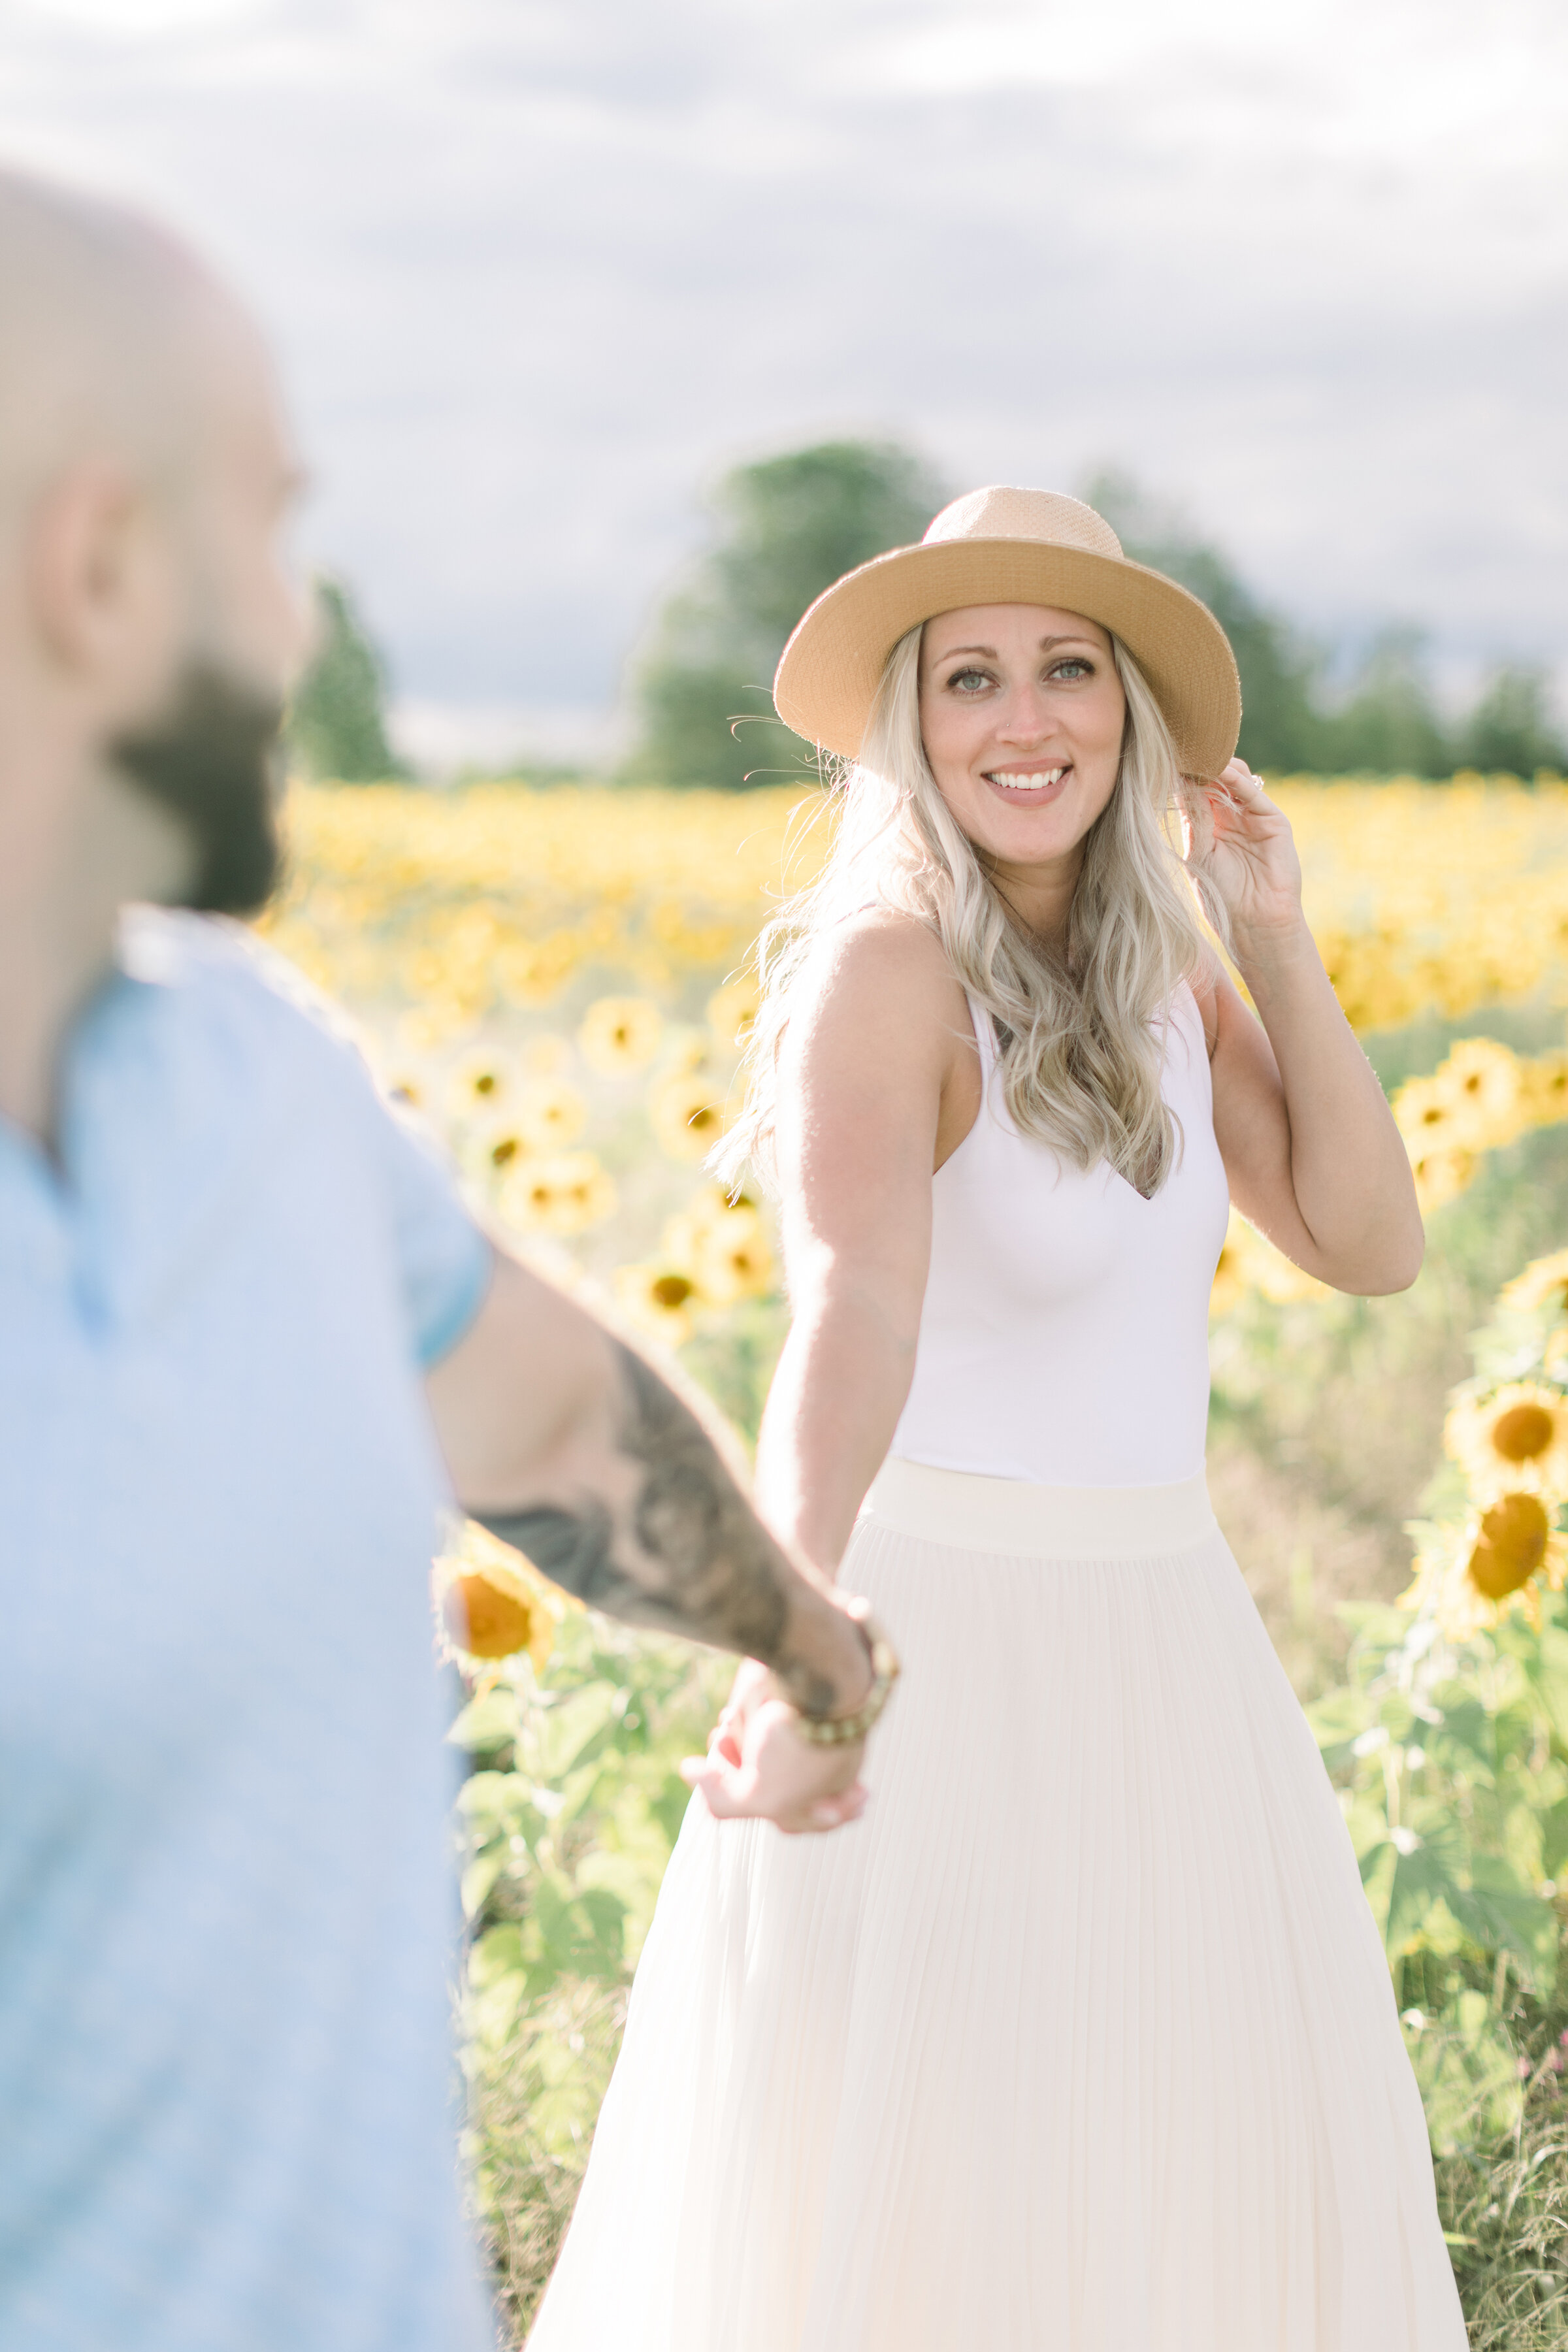  The beautiful soon to be bride holds her fiancés hand as she smiles at the camera in a bright and airy summer engagement session in Ashton, Ontario’s sunflower field. Couple goals professional engagement photographer Chelsea Mason Photography outdoo